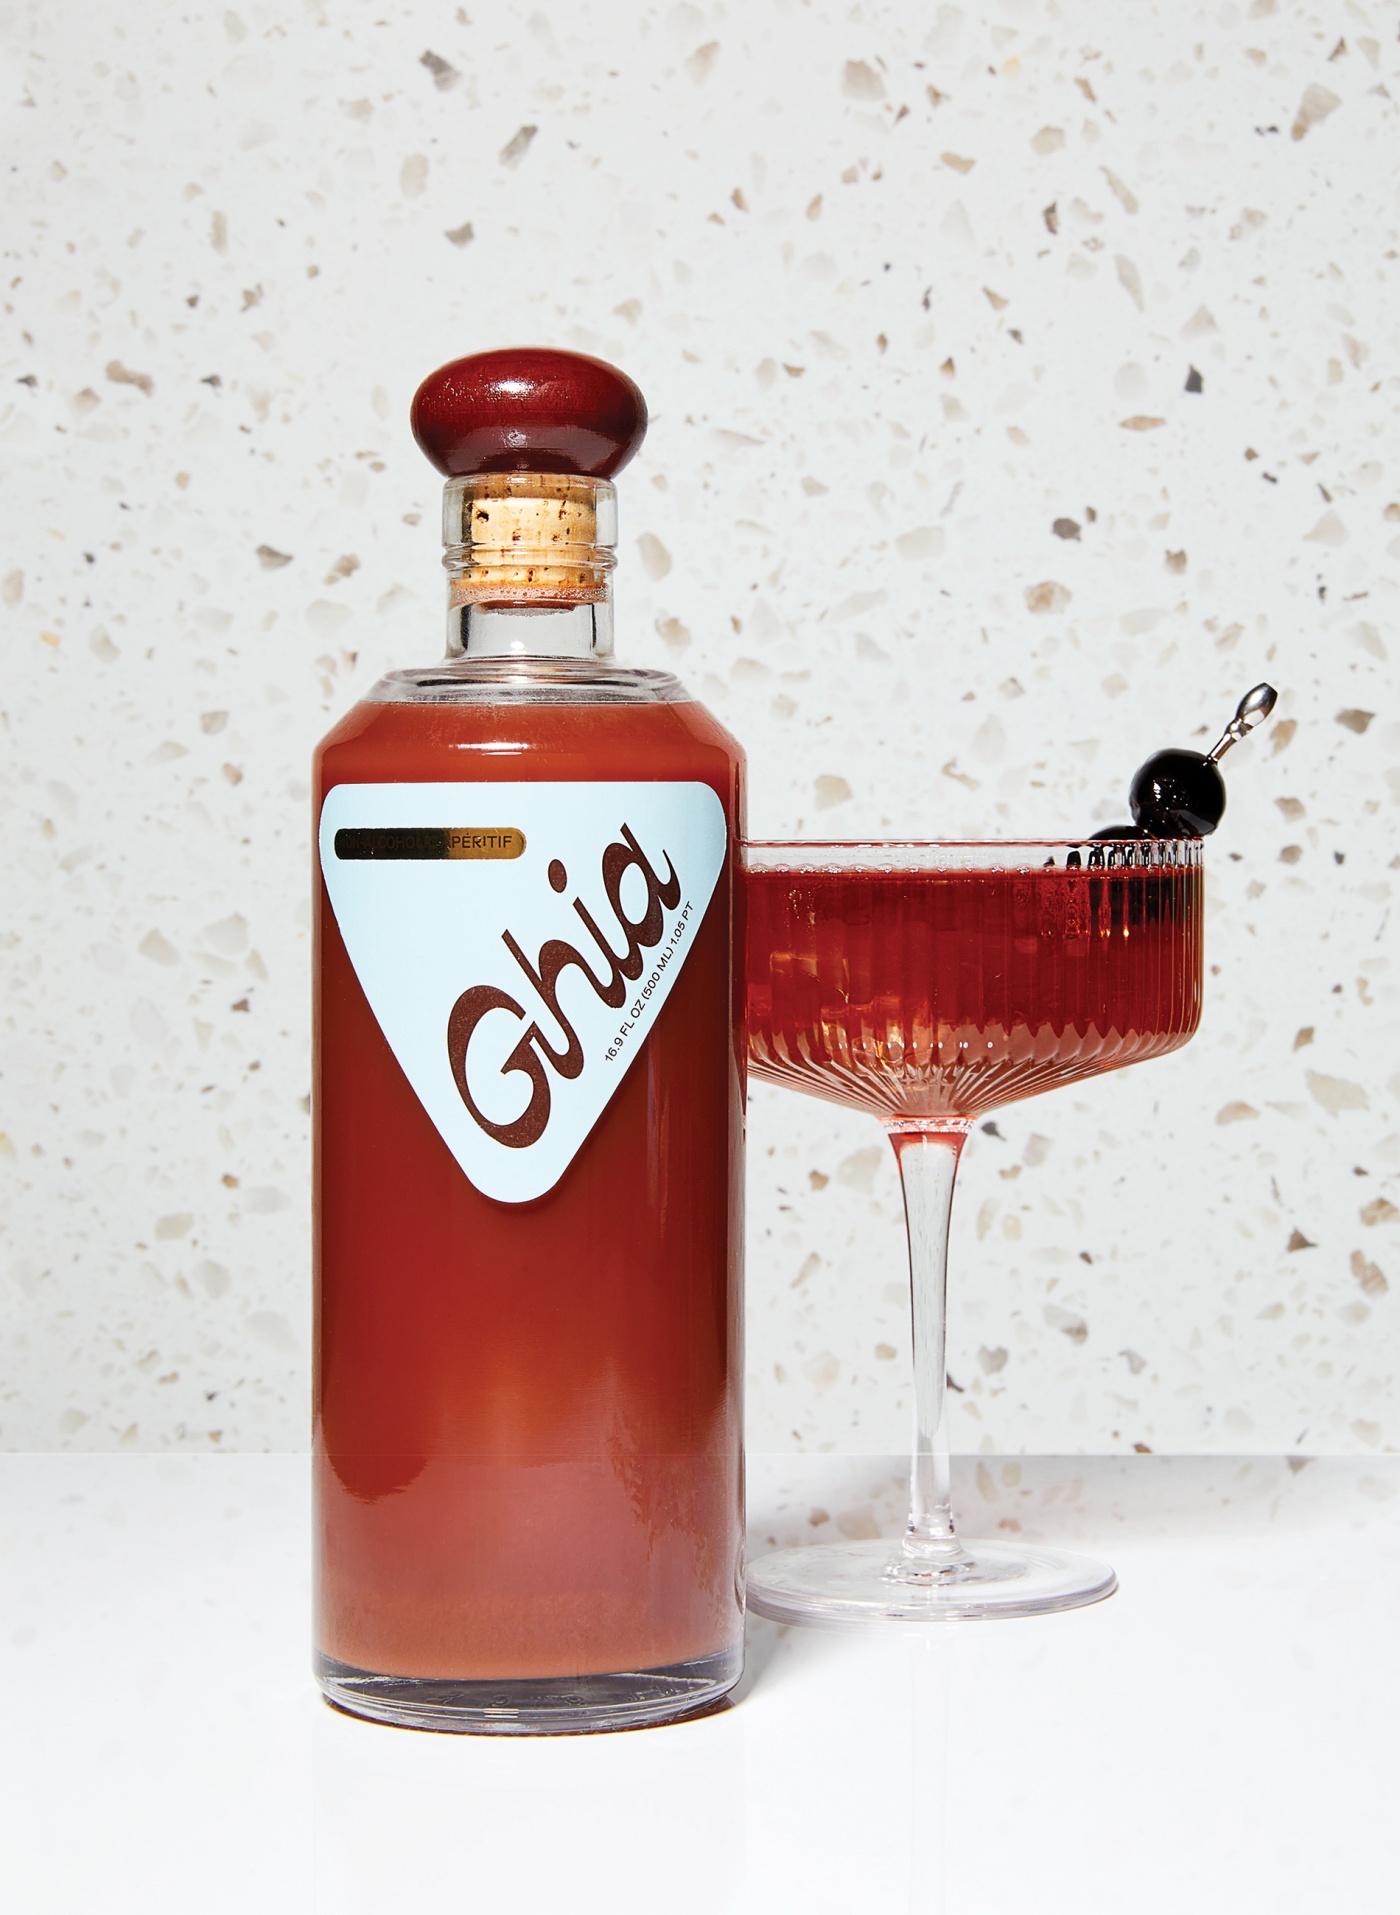 photo of Ghia bottle and cocktail